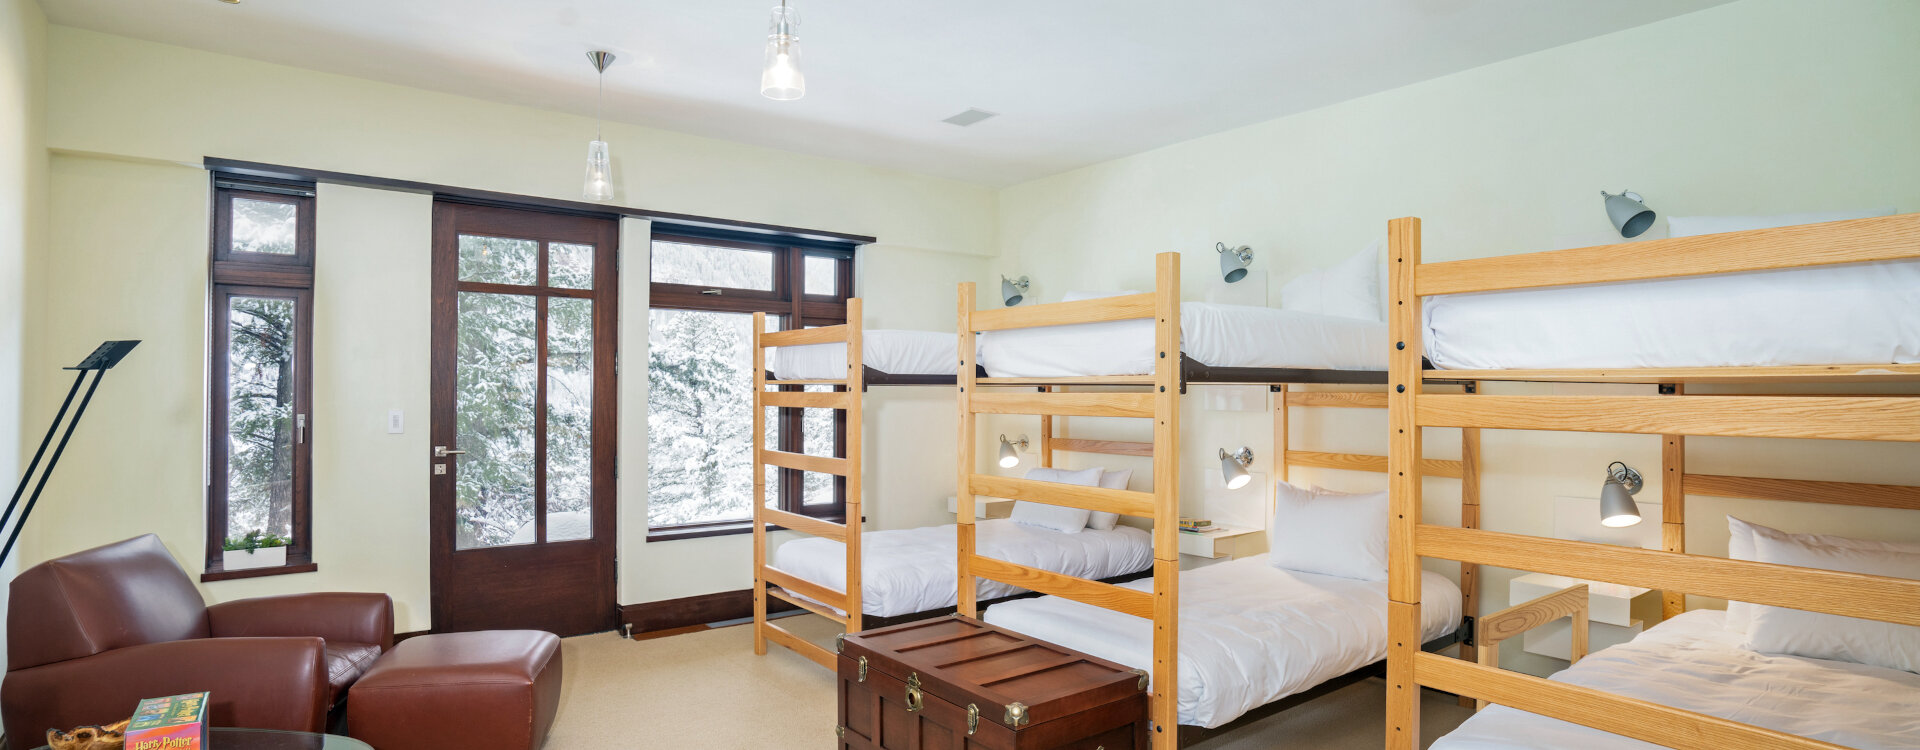 10.08-Telluride-Vacation-Rental-The-Estate-at-Royer-Falls-Bunk-Bedroom